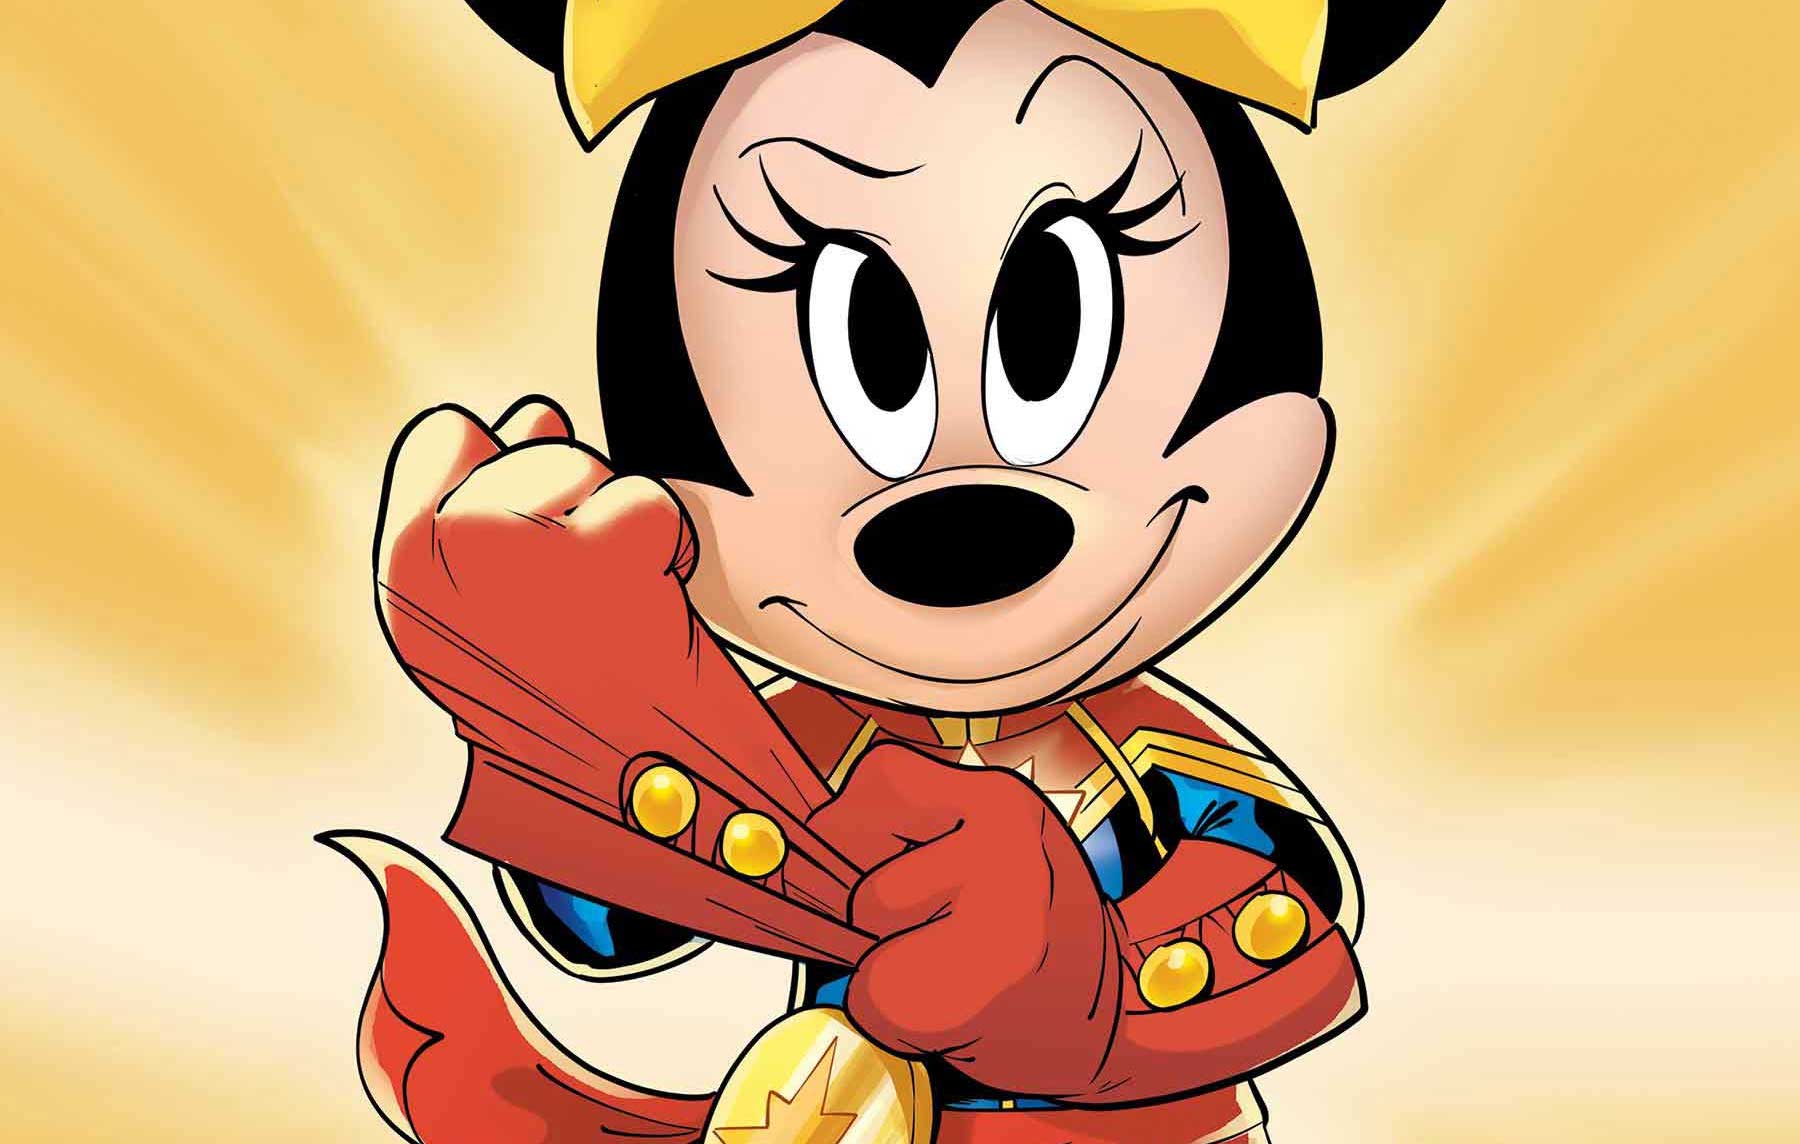 100 Years of Disney continues with new 'Captain Marvel' and 'Ms. Marvel' covers